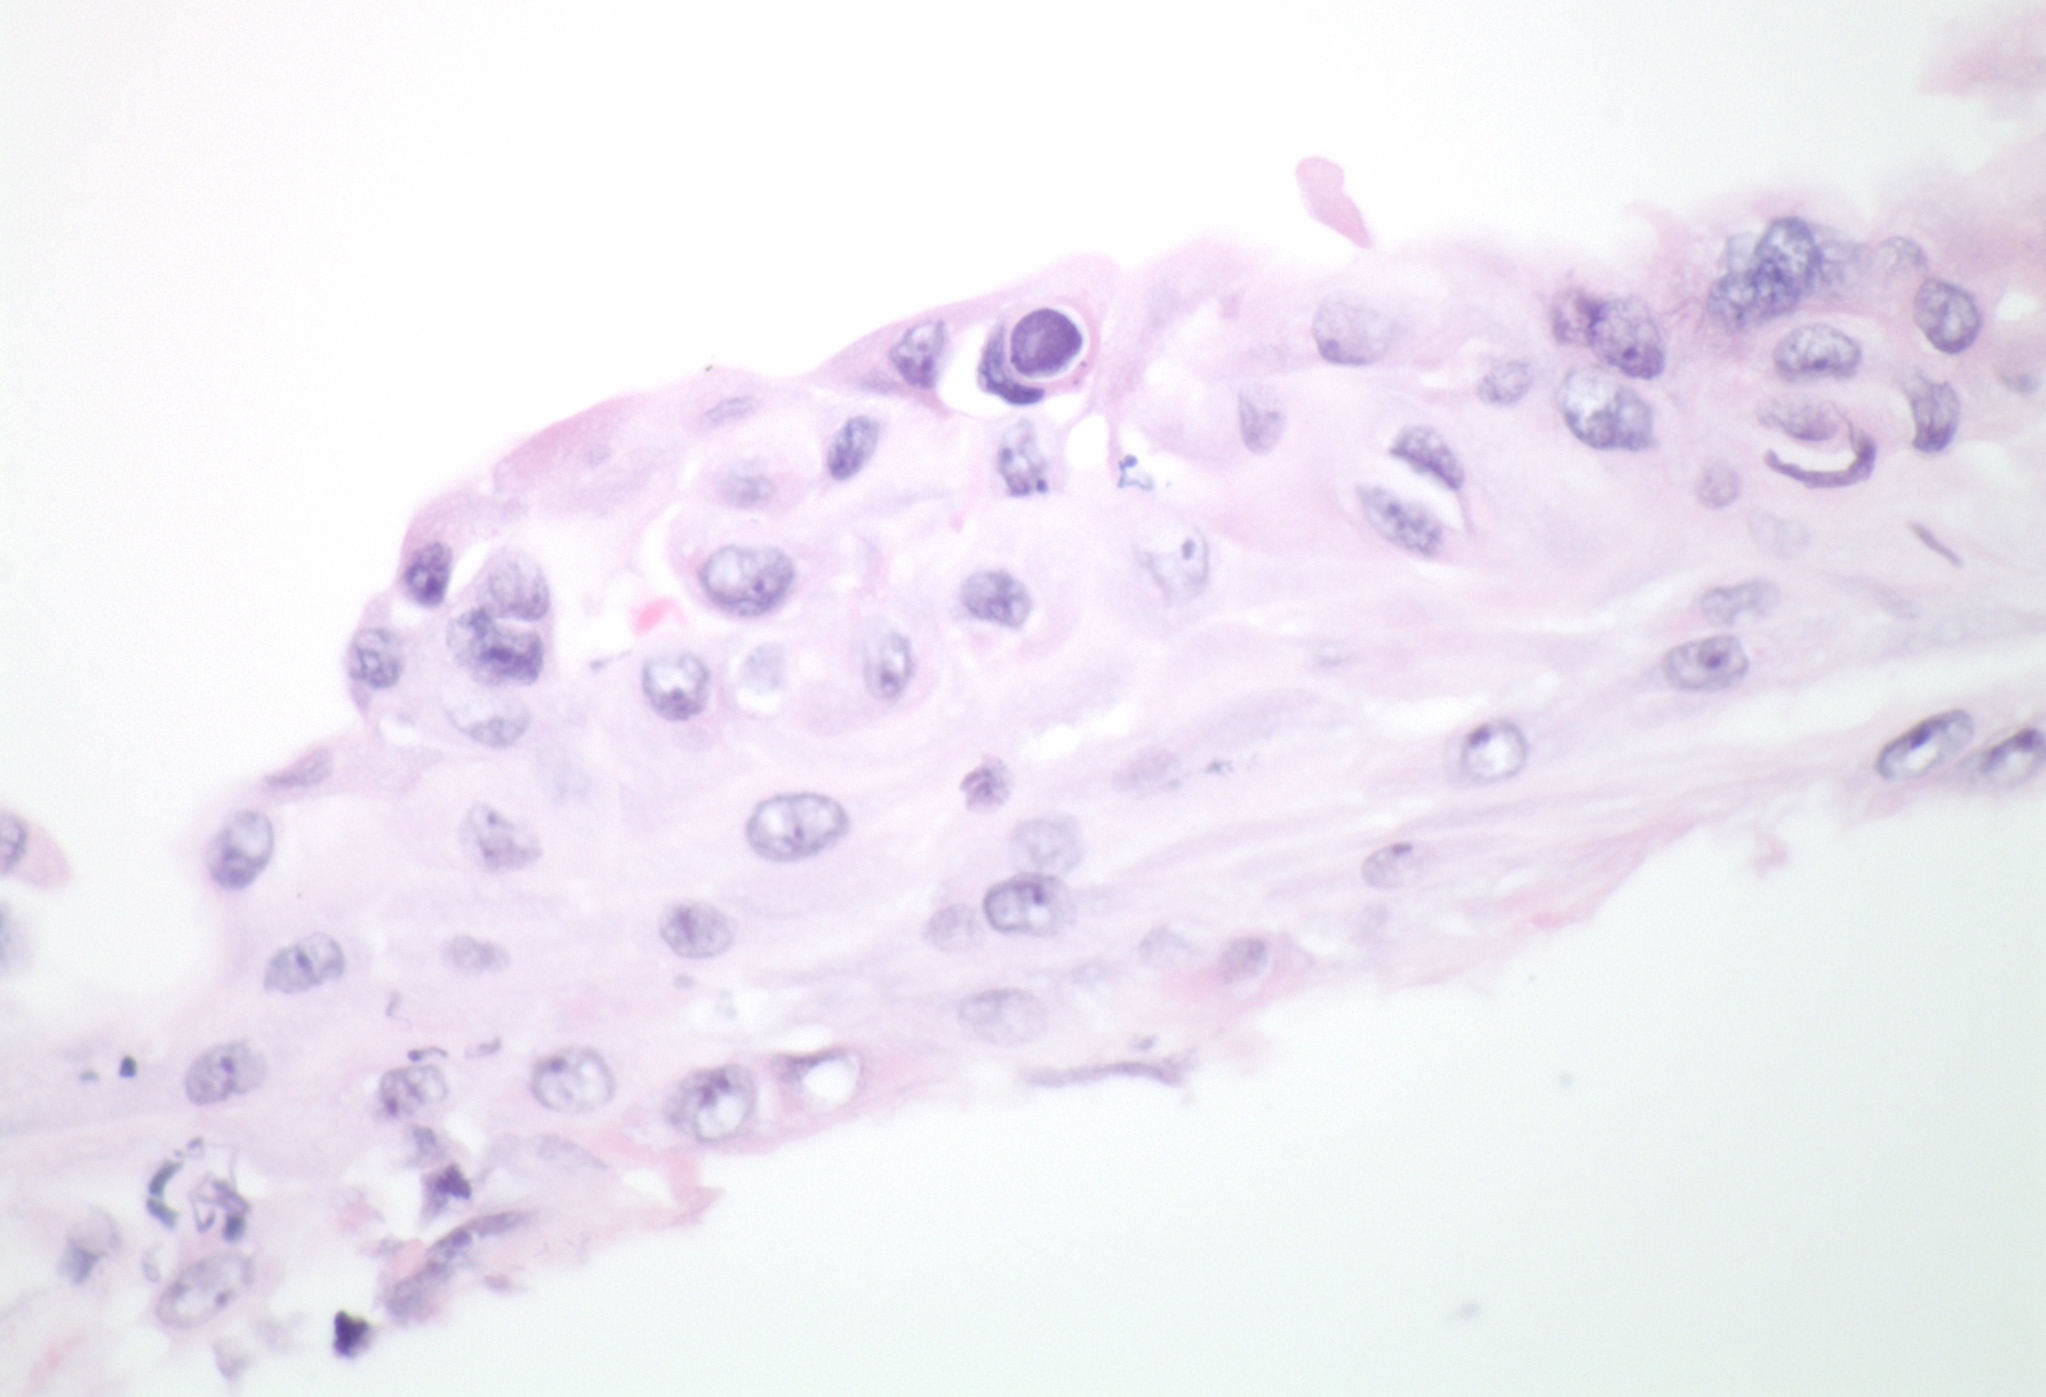 H&E stain demonstrates a classic example of the double-walled cyst structure of Acanthamoeba.